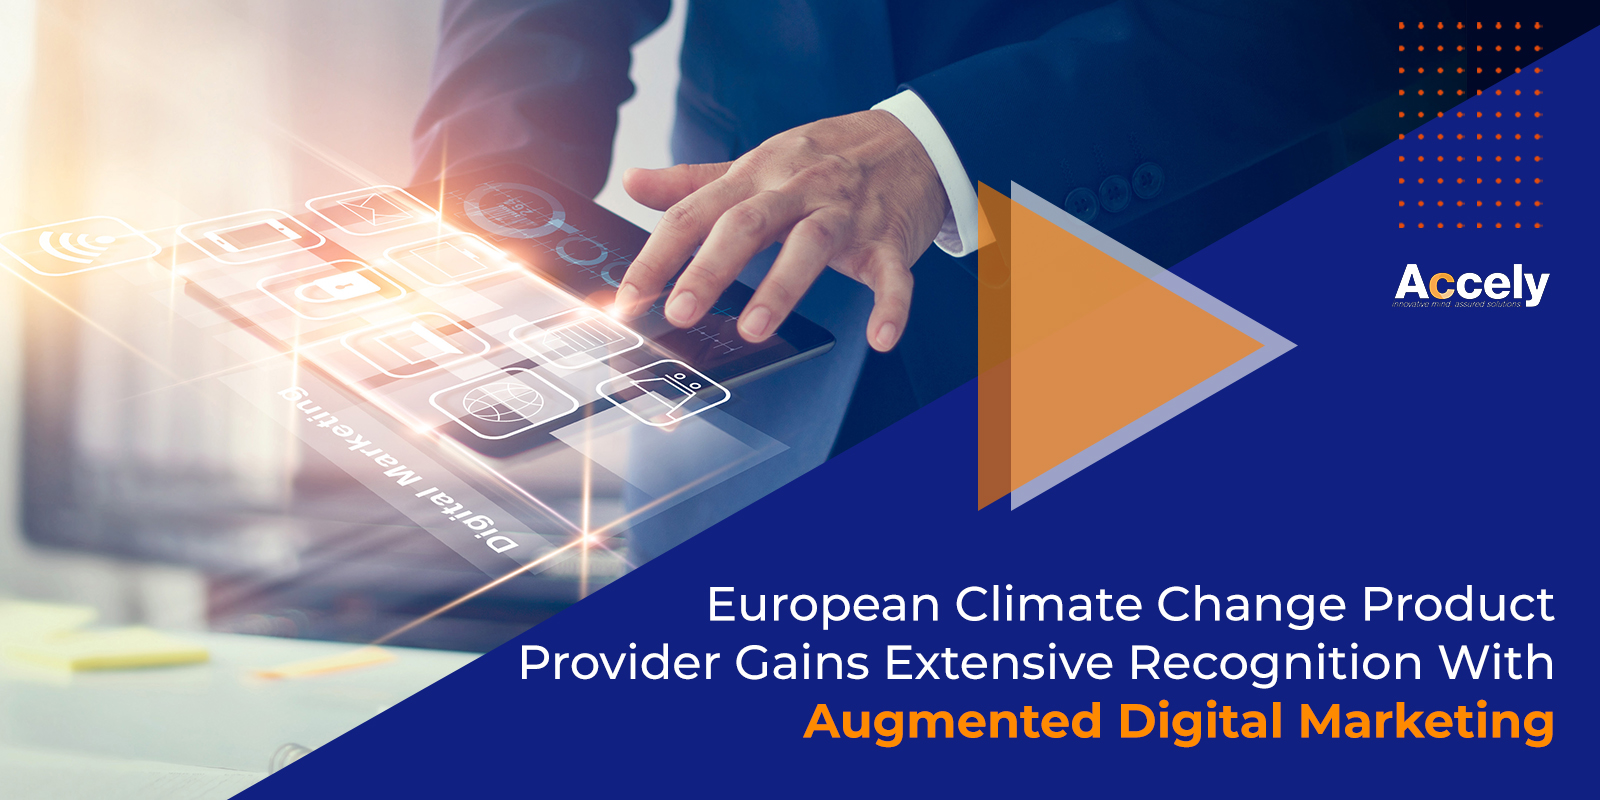 European Climate Change Product Provider Gains Extensive Recognition With Augmented Digital Marketing